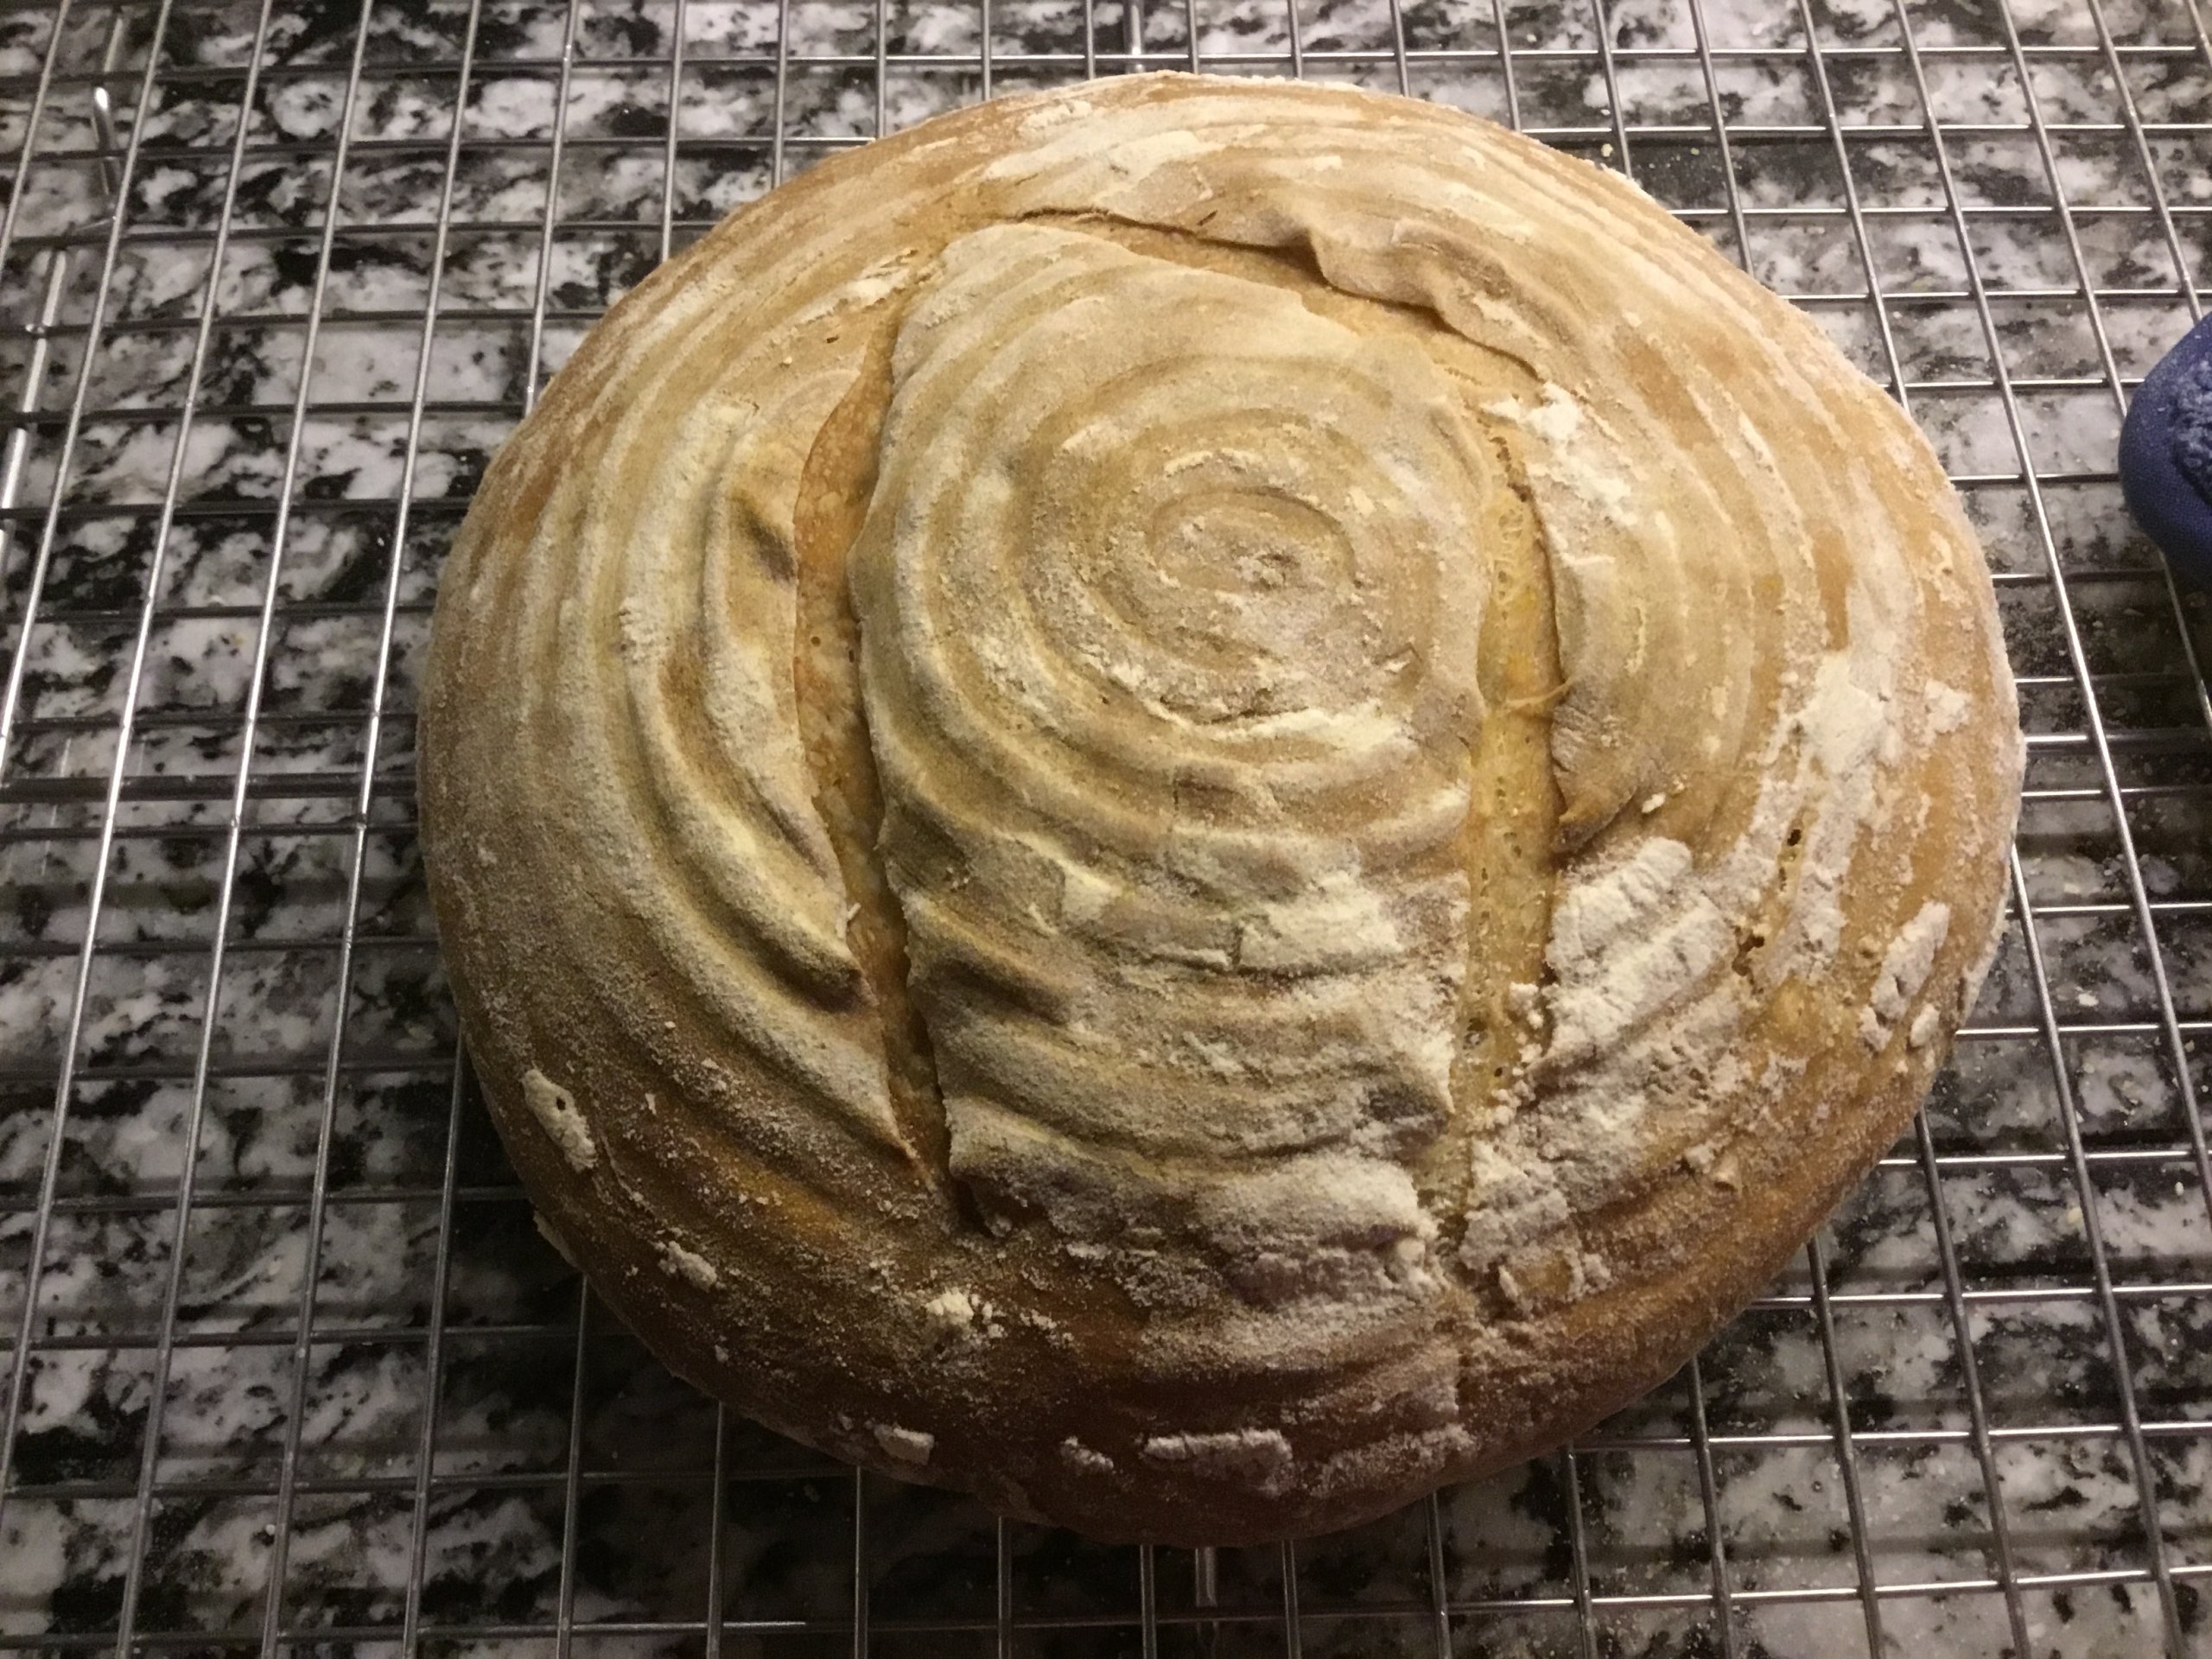 First loaf of bread using a Banneton